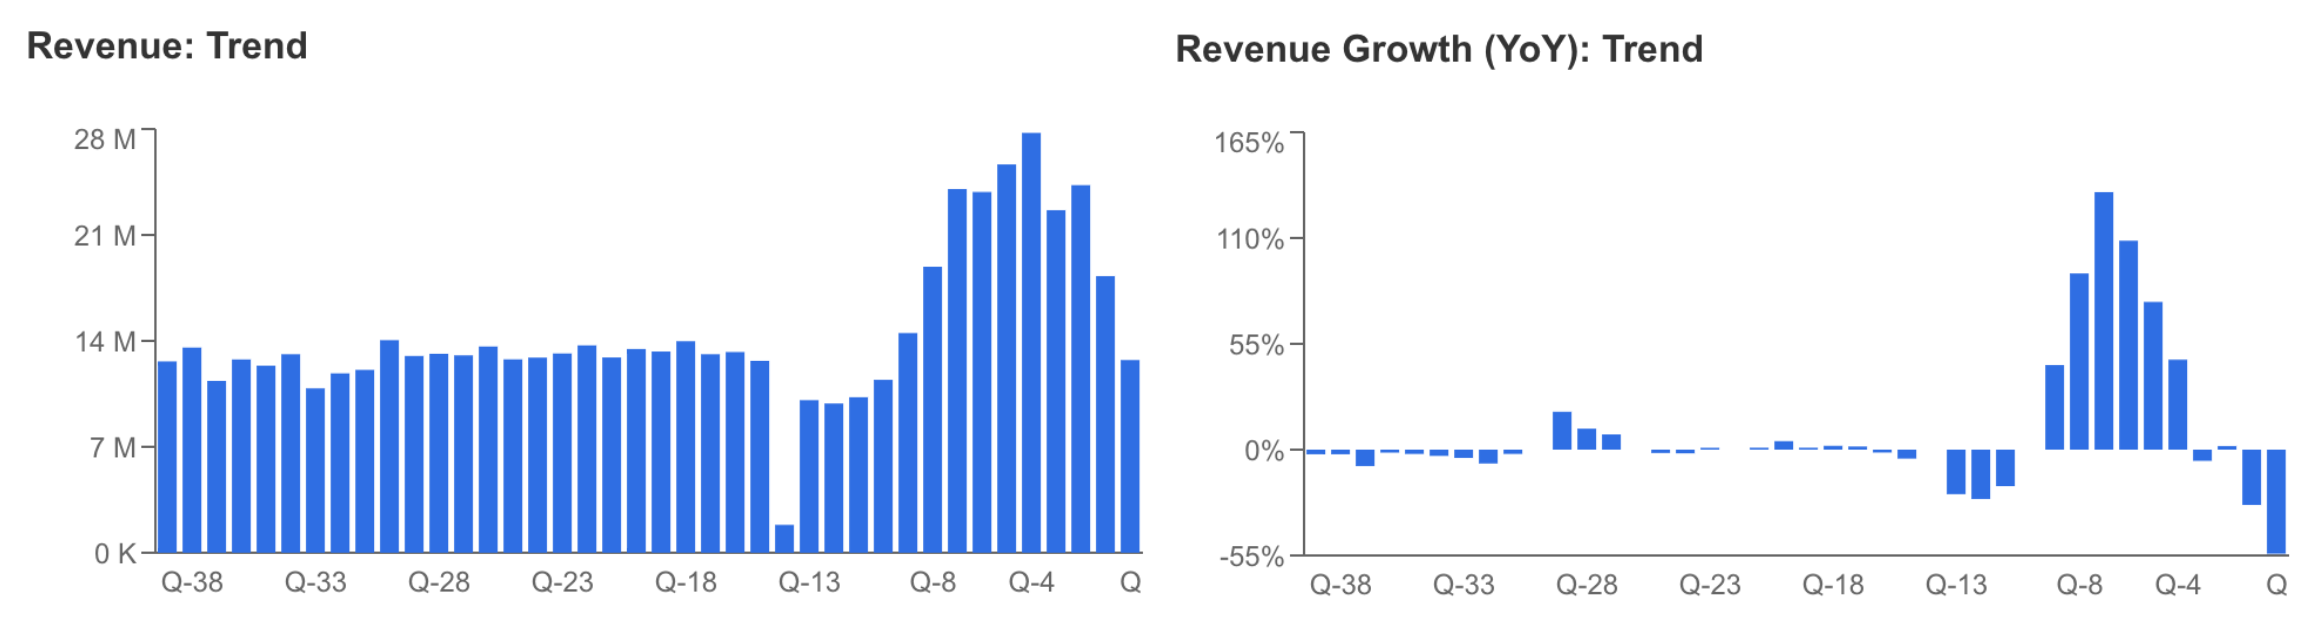 Revenue Trend and Growth YoY